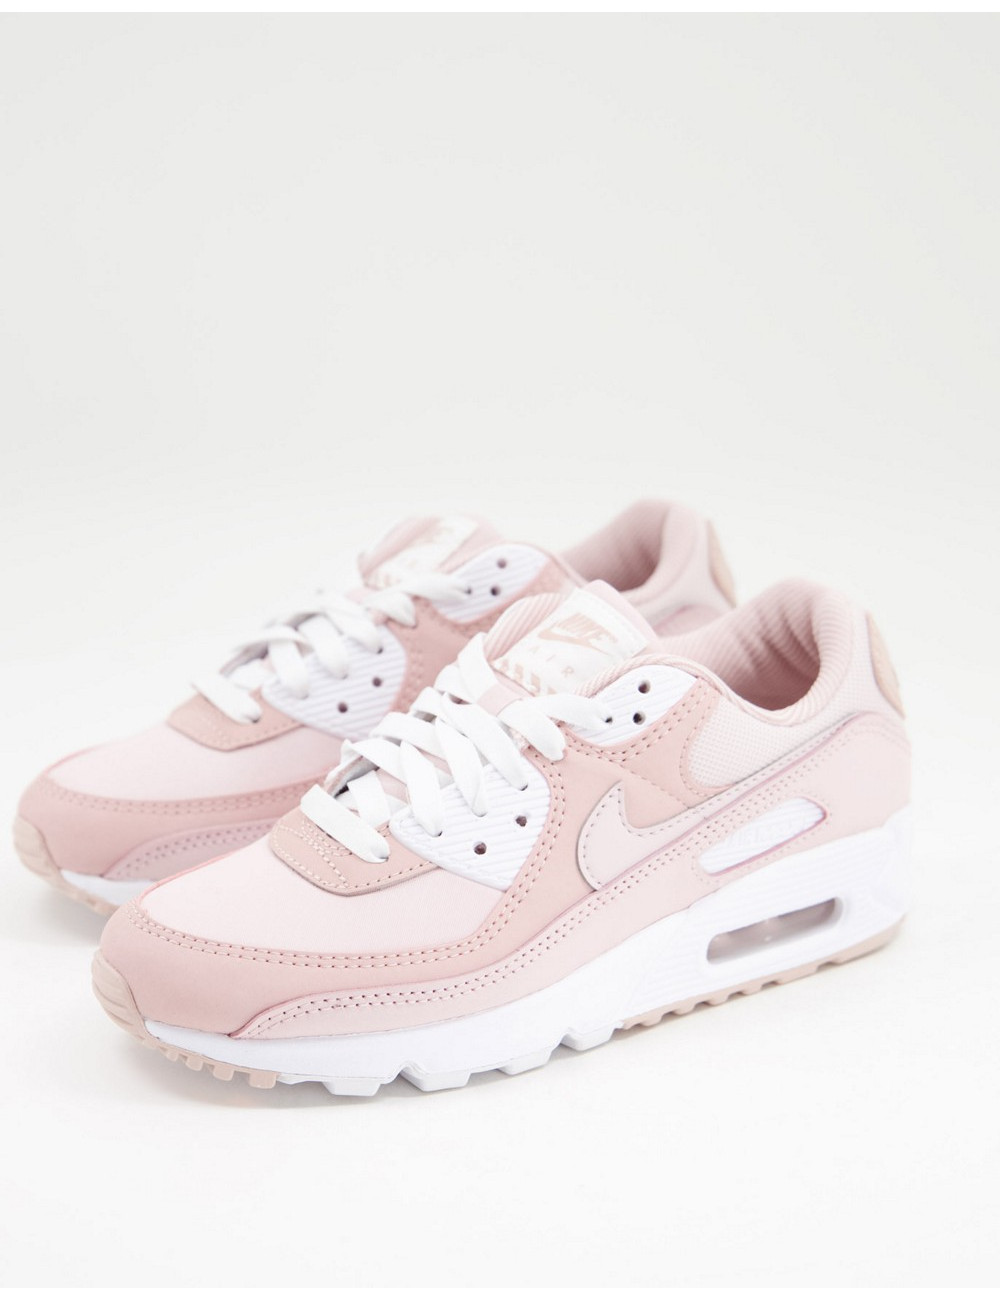 Nike Air Max 90 trainers in...